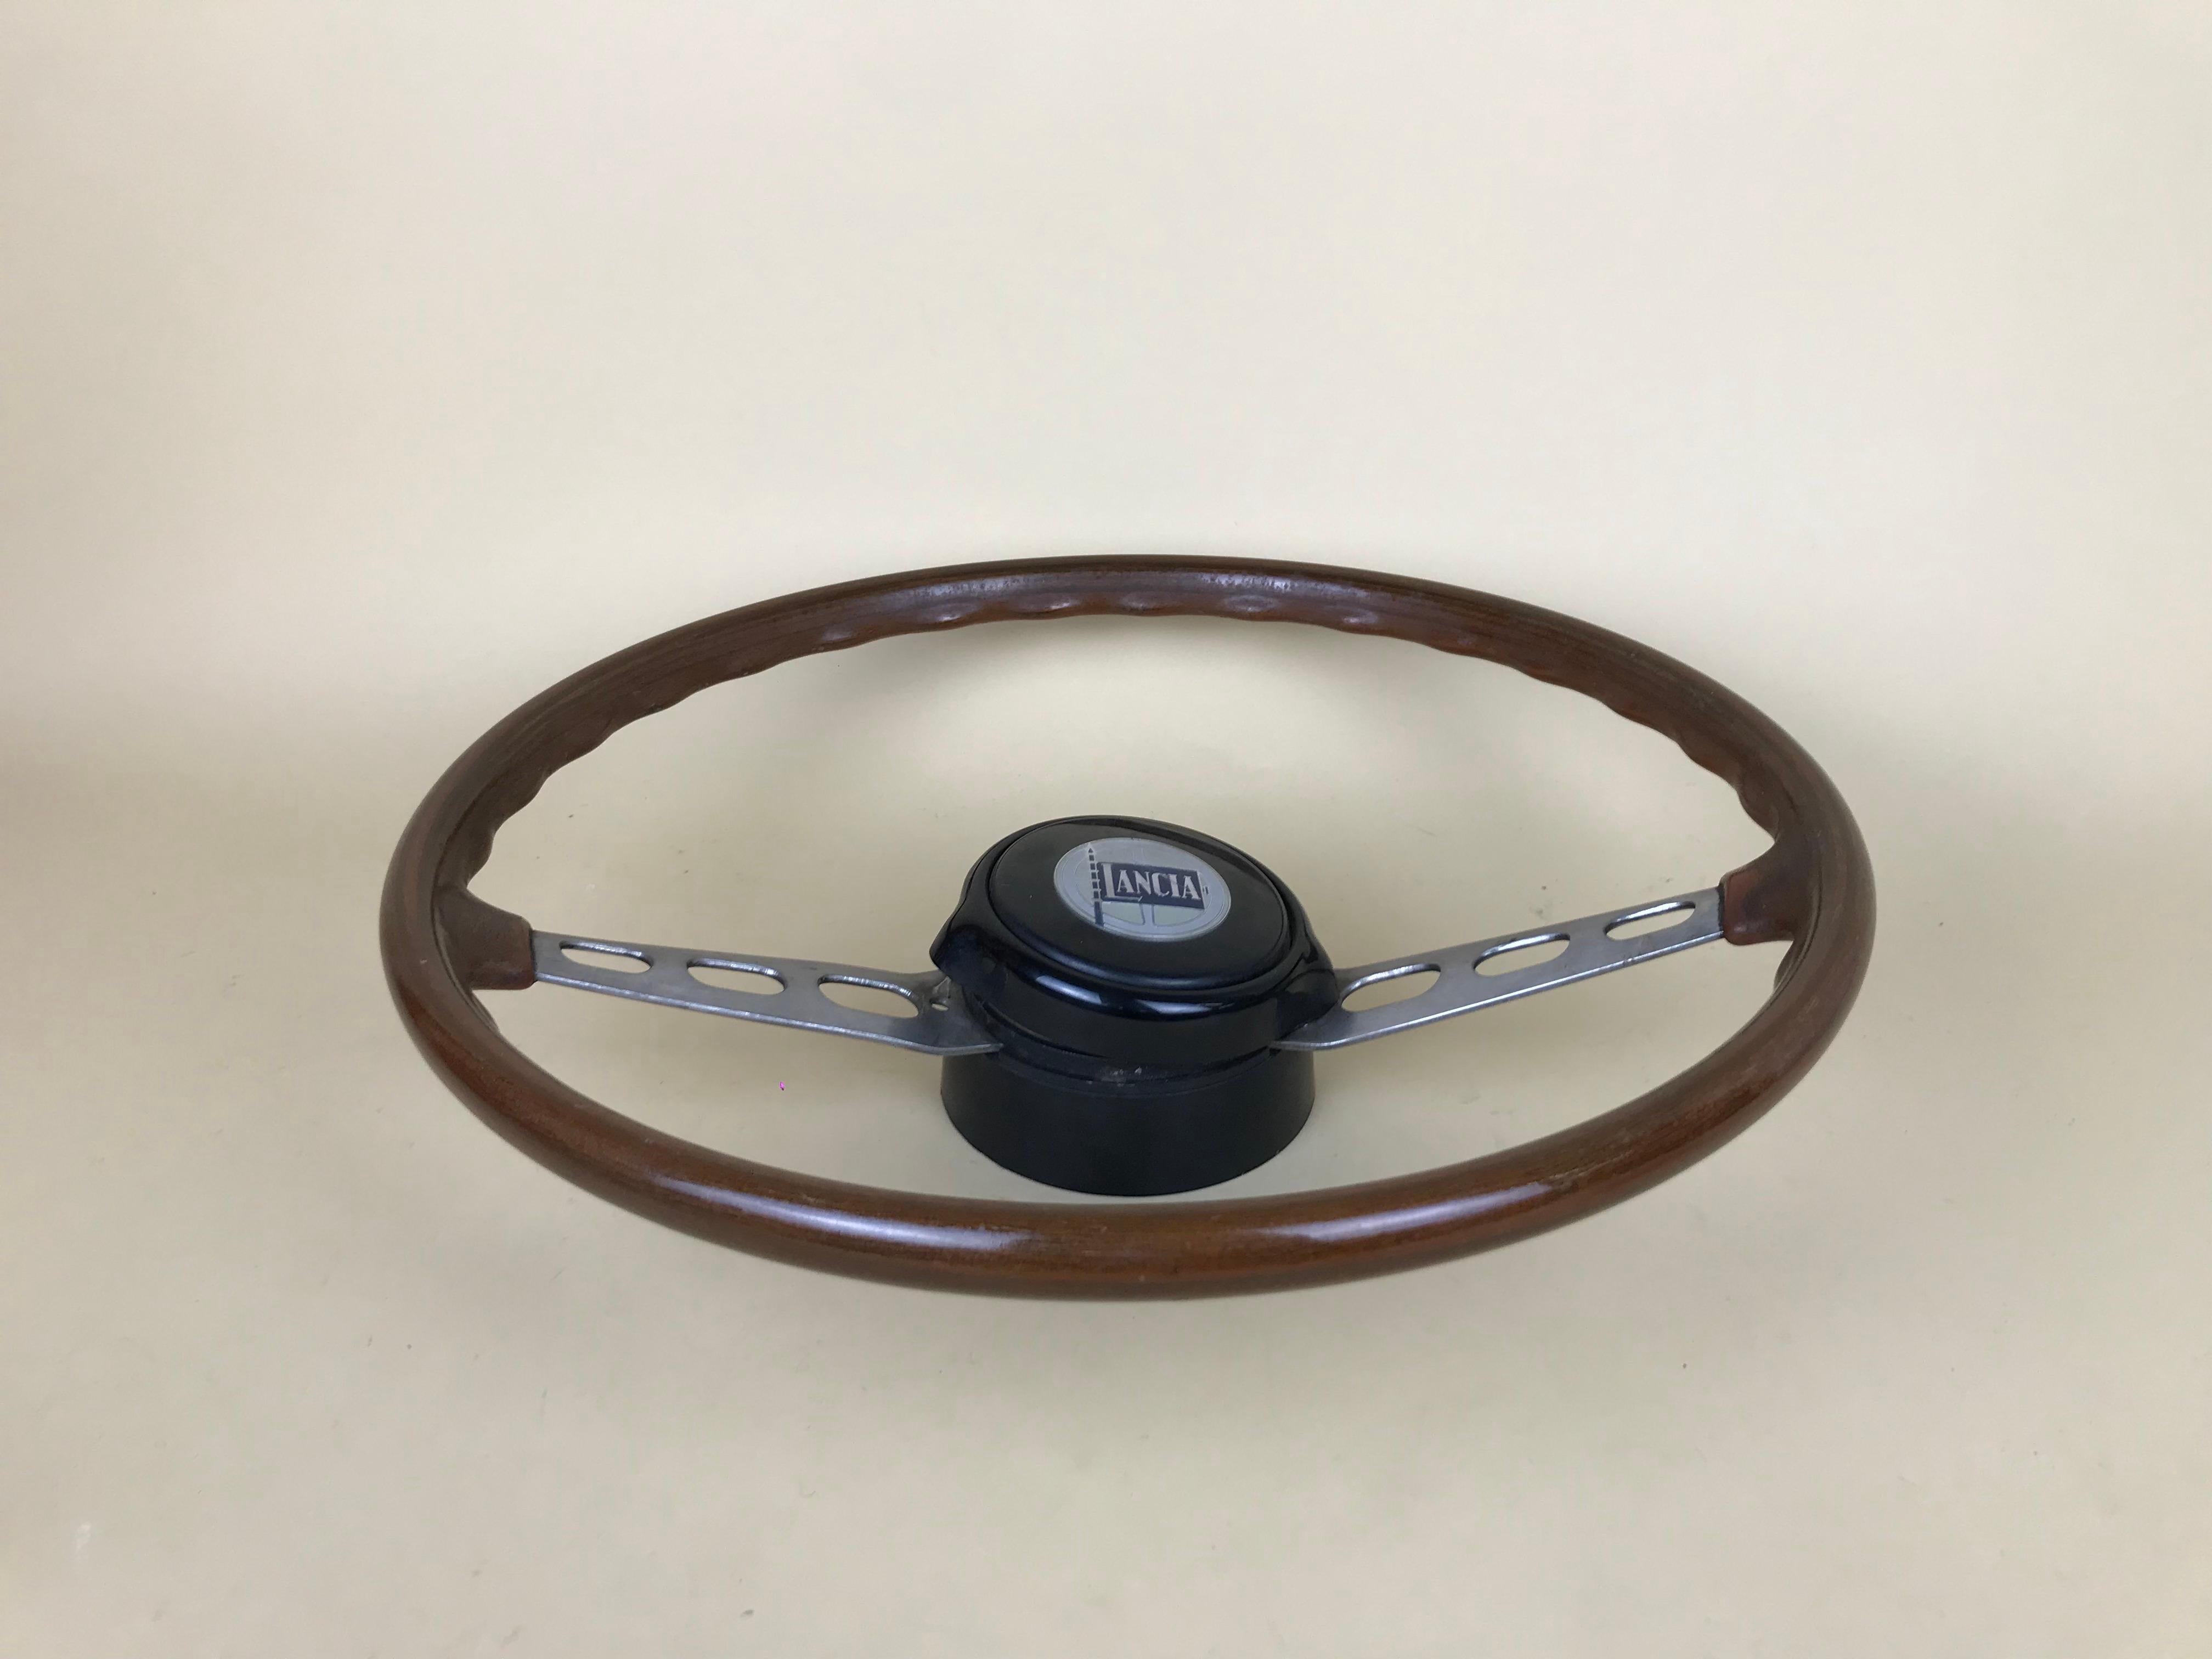 1960s Vintage Wooden and Metal Lancia Steering Wheel Made in Italy For Sale 1